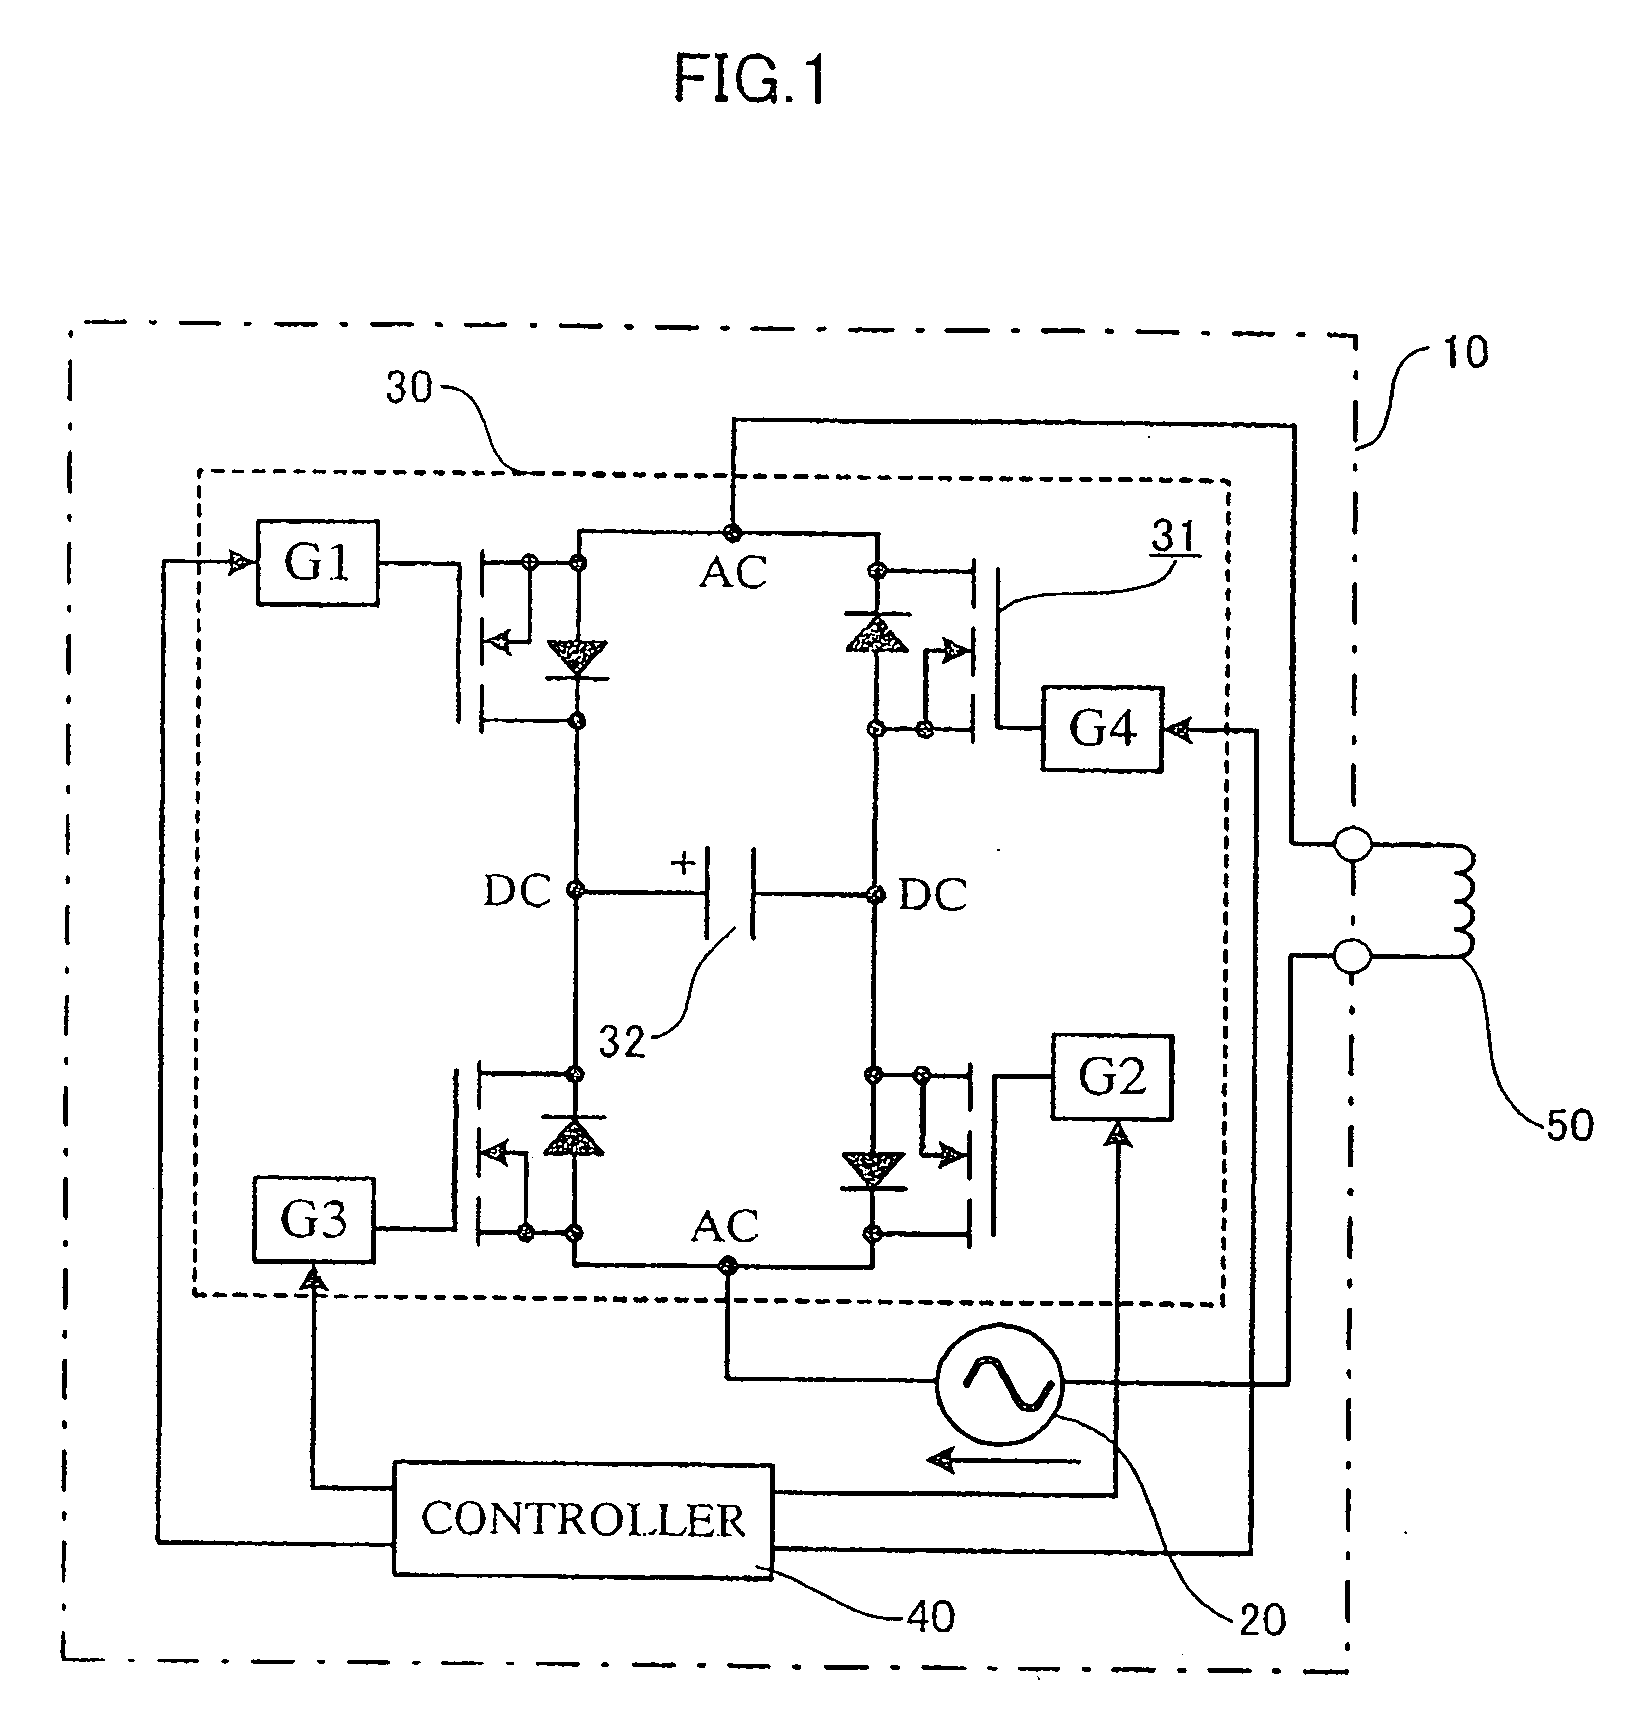 Alternating-current power supply device recovering magnetic energy